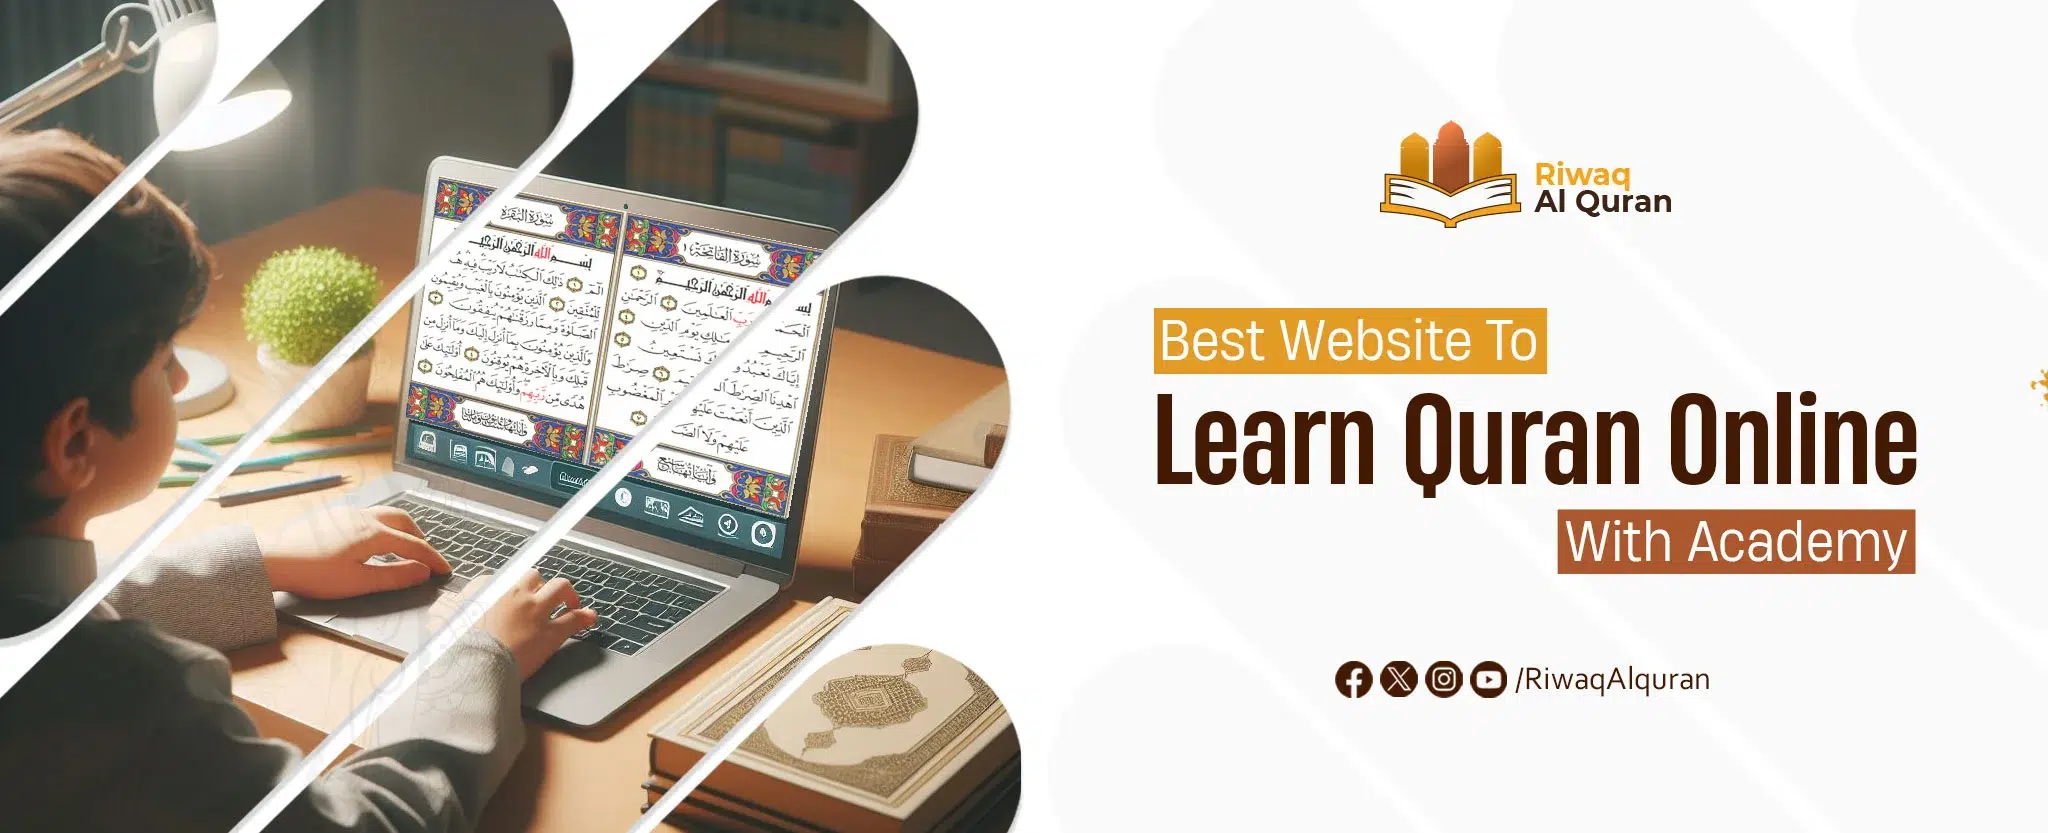 Best Website To Learn Quran Online ًWith Academy